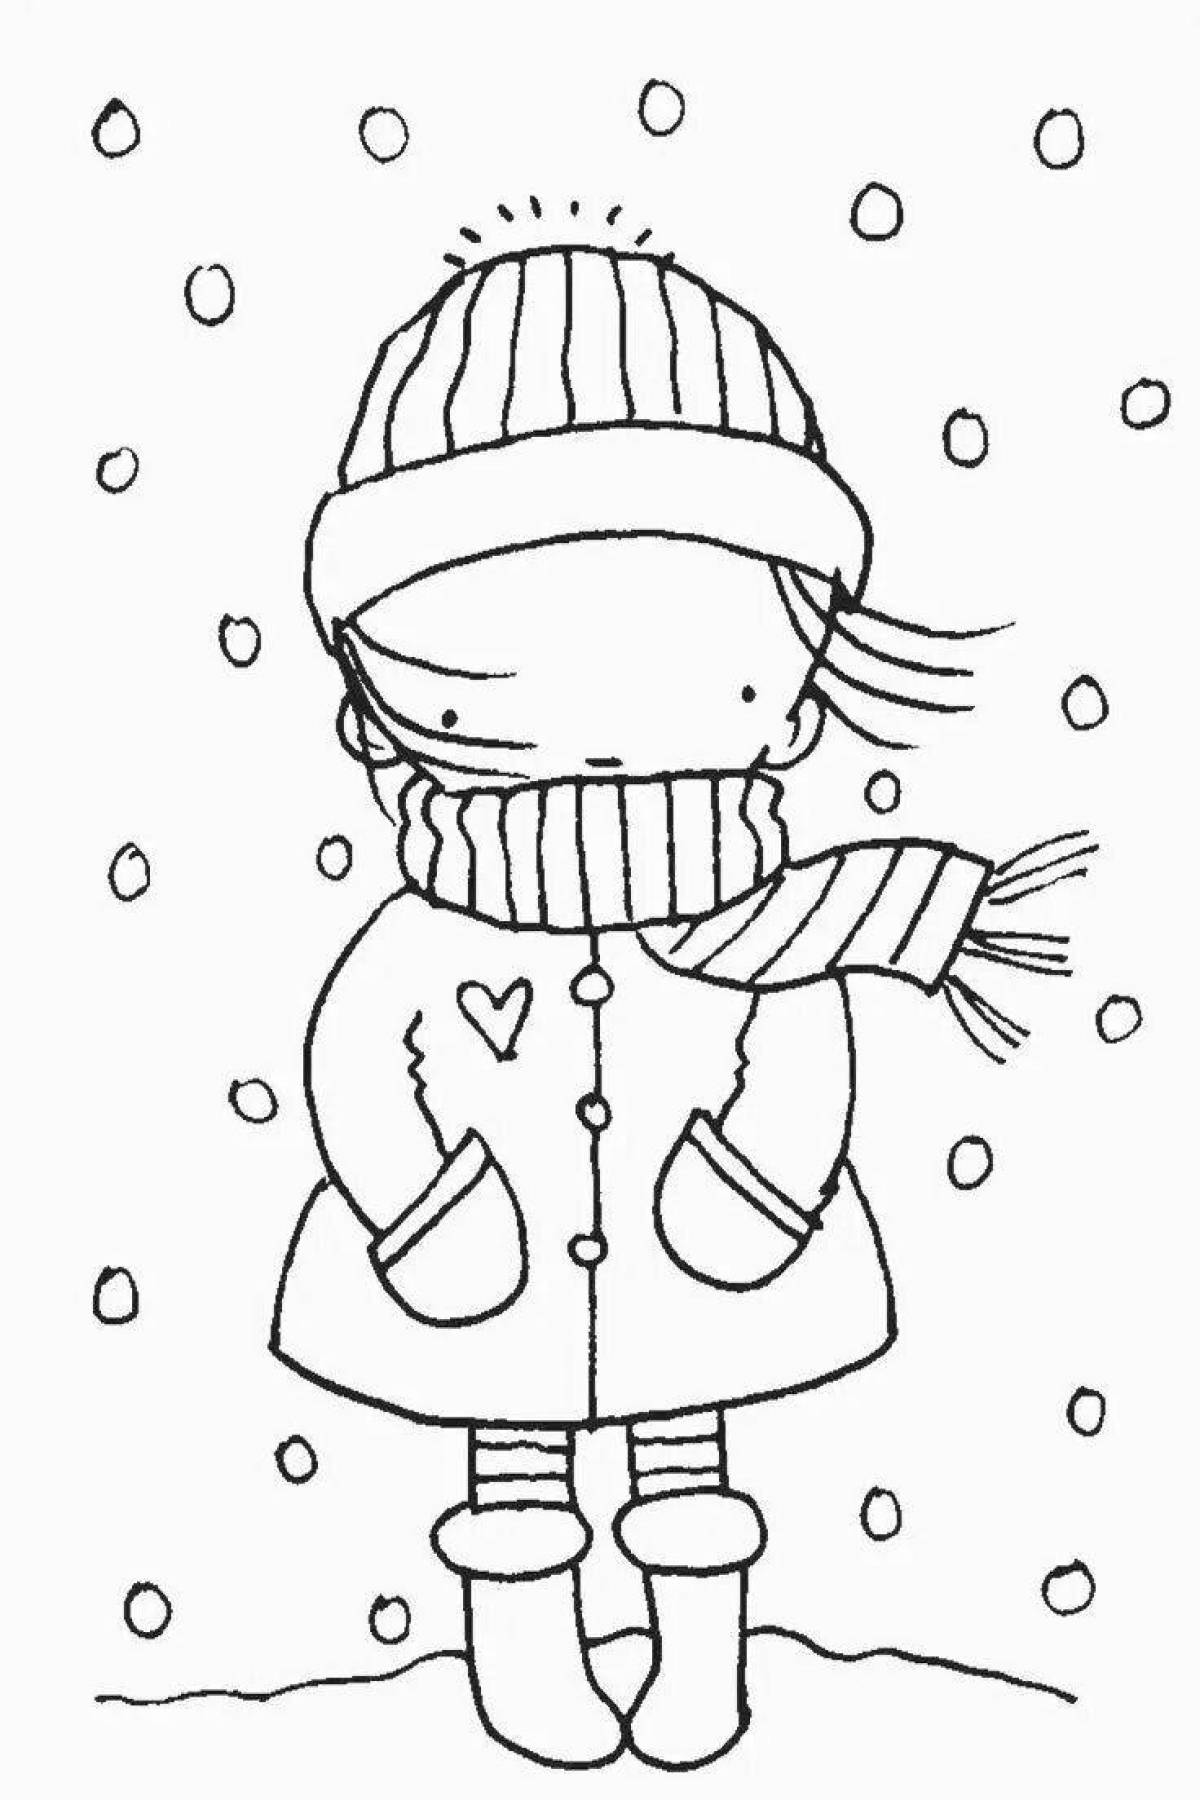 Weird coloring of winter clothes for children 6-7 years old